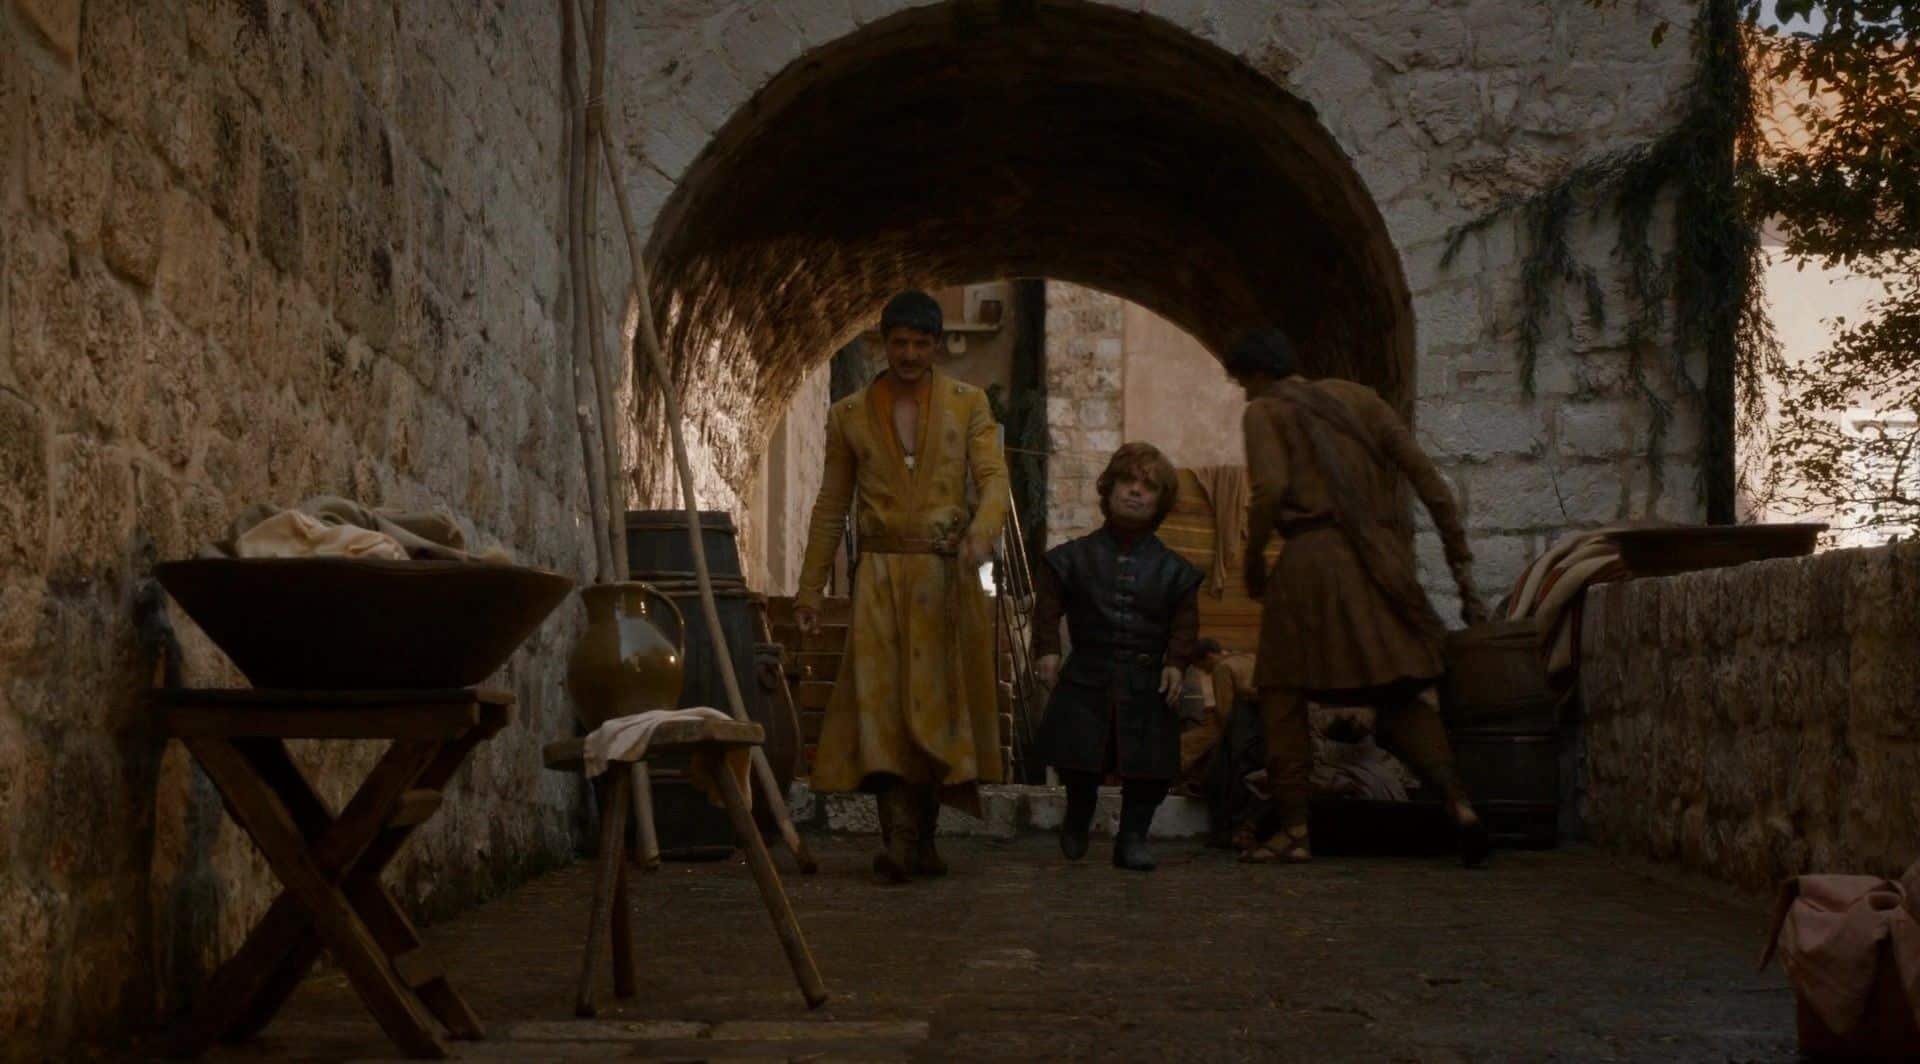 Game Of Thrones Croatia: Locations And Tours - S4 E1 Ethnographic Museum, Dubrovnik - Littlefinger's Brothel